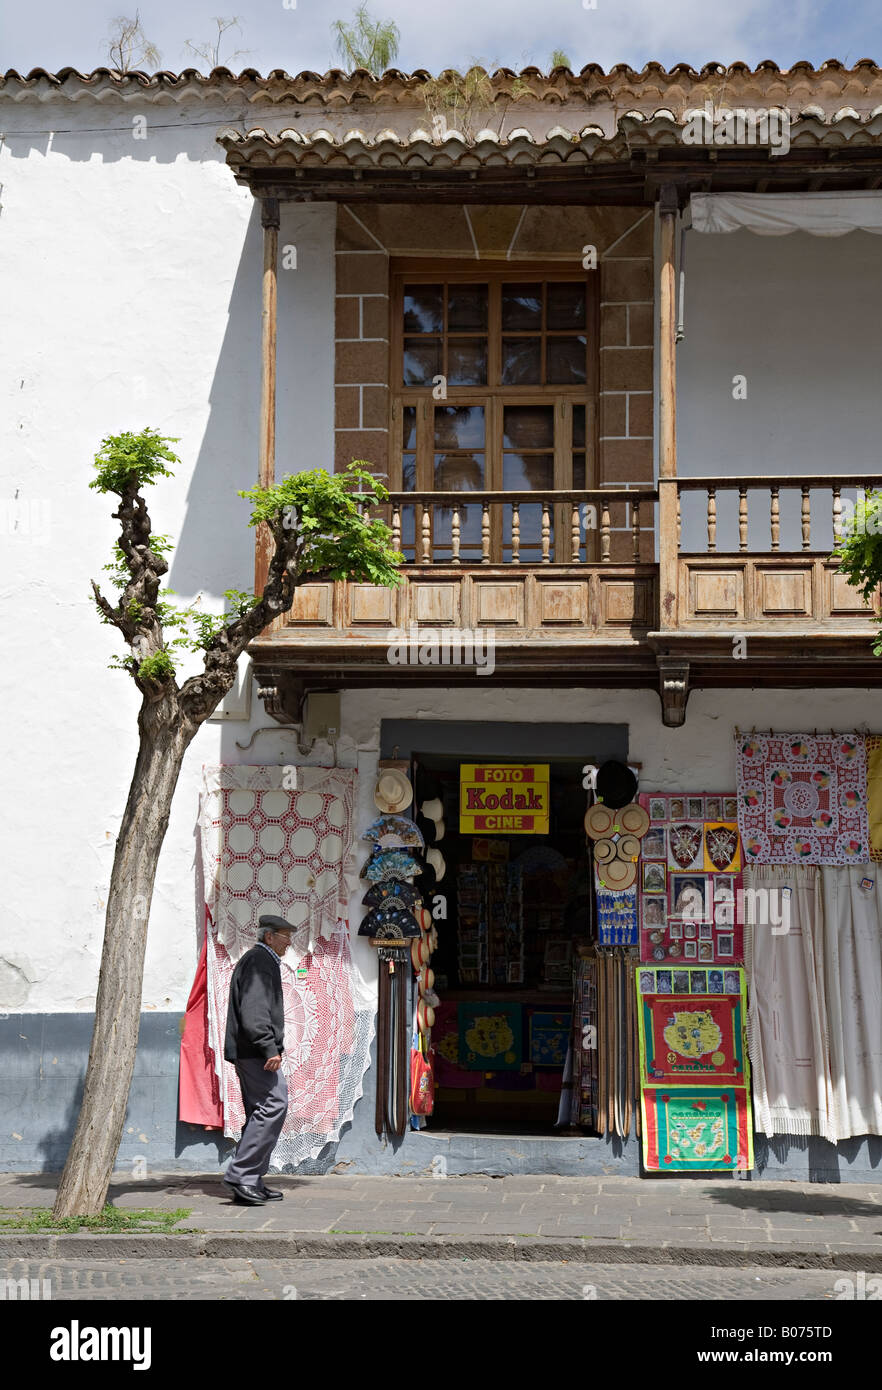 Old man walking past shop with traditional Canarian balcony and selling lace Teror 'Gran Canaria' Spain Stock Photo